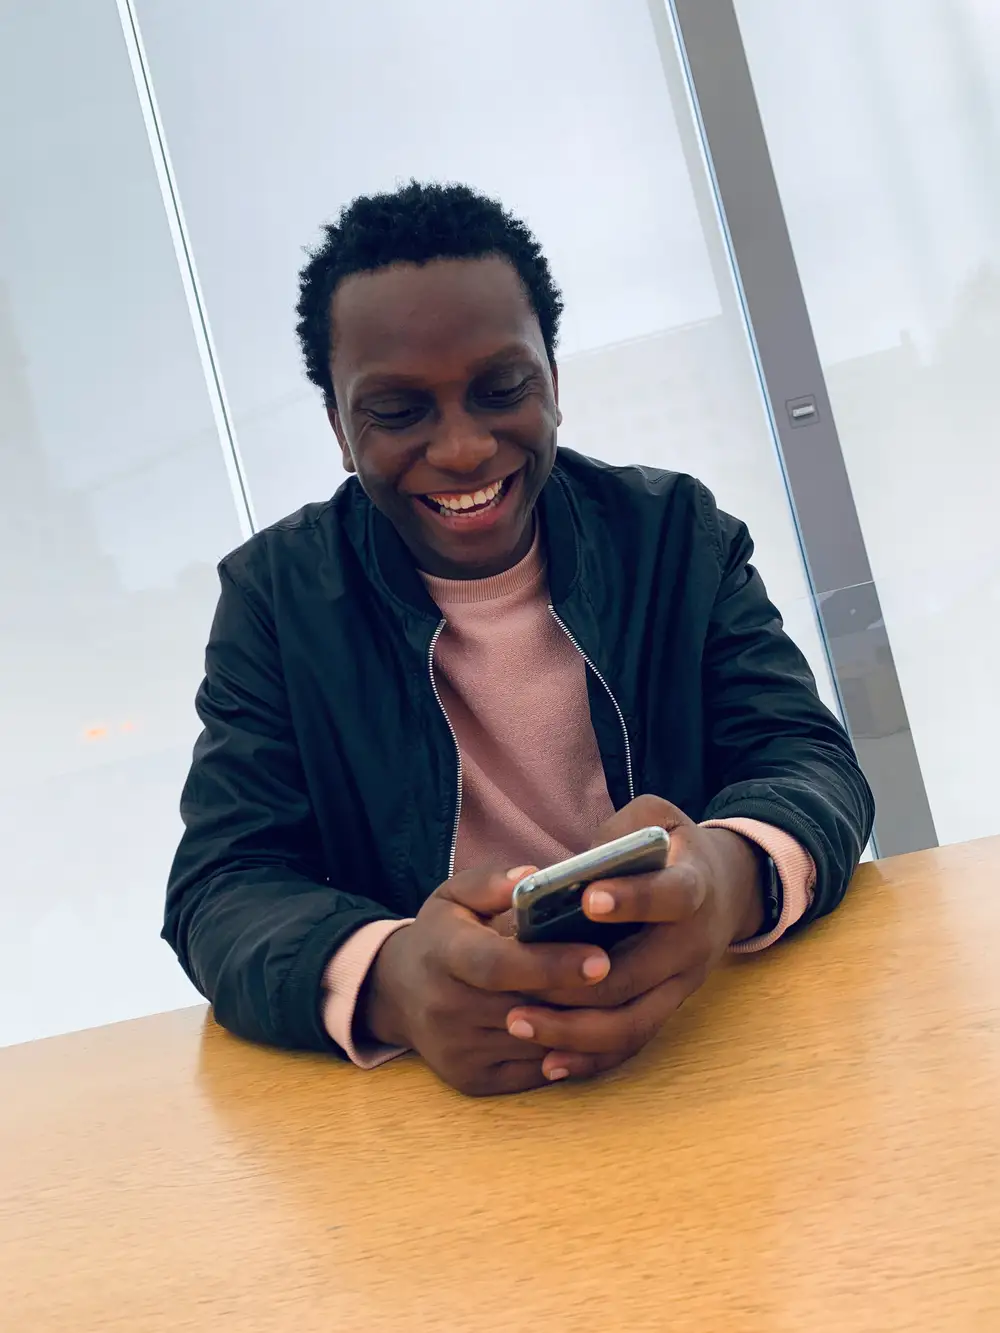 Young man laughing on his phone